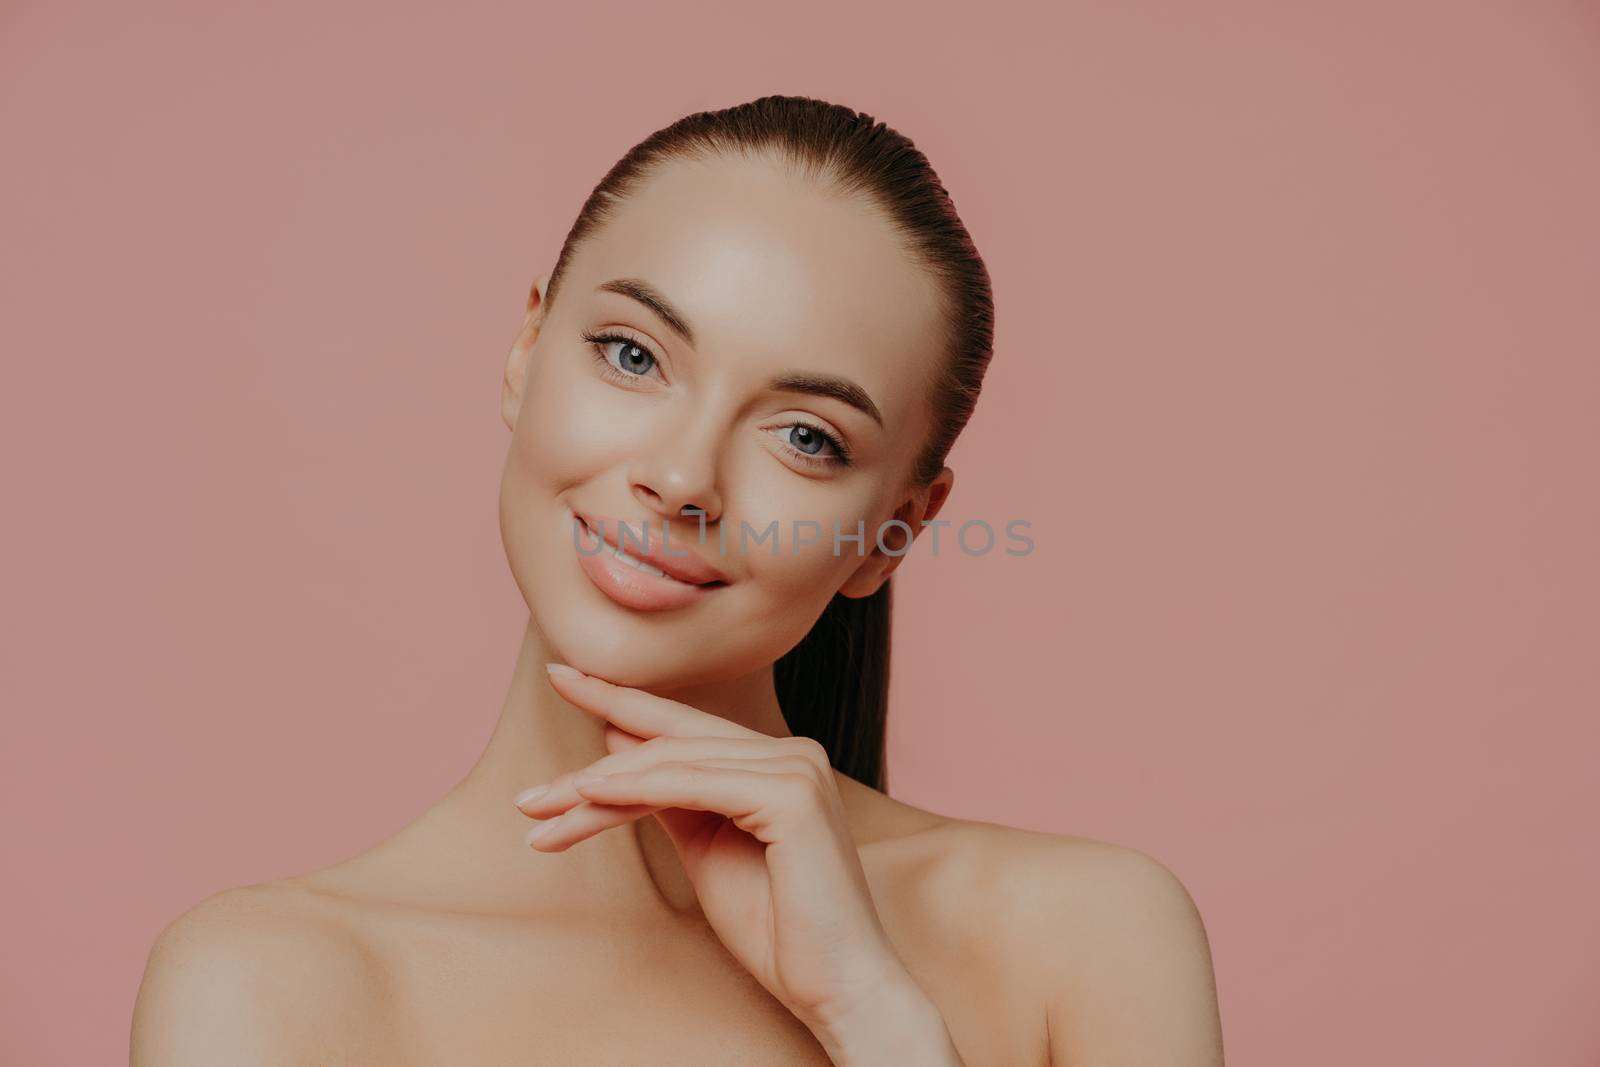 Charming beautiful woman with pony tail, touches perfect soft skin after cosmetology procedures, using beauty cream, stands with bare shouldes, poses against pink background. Natural as she is